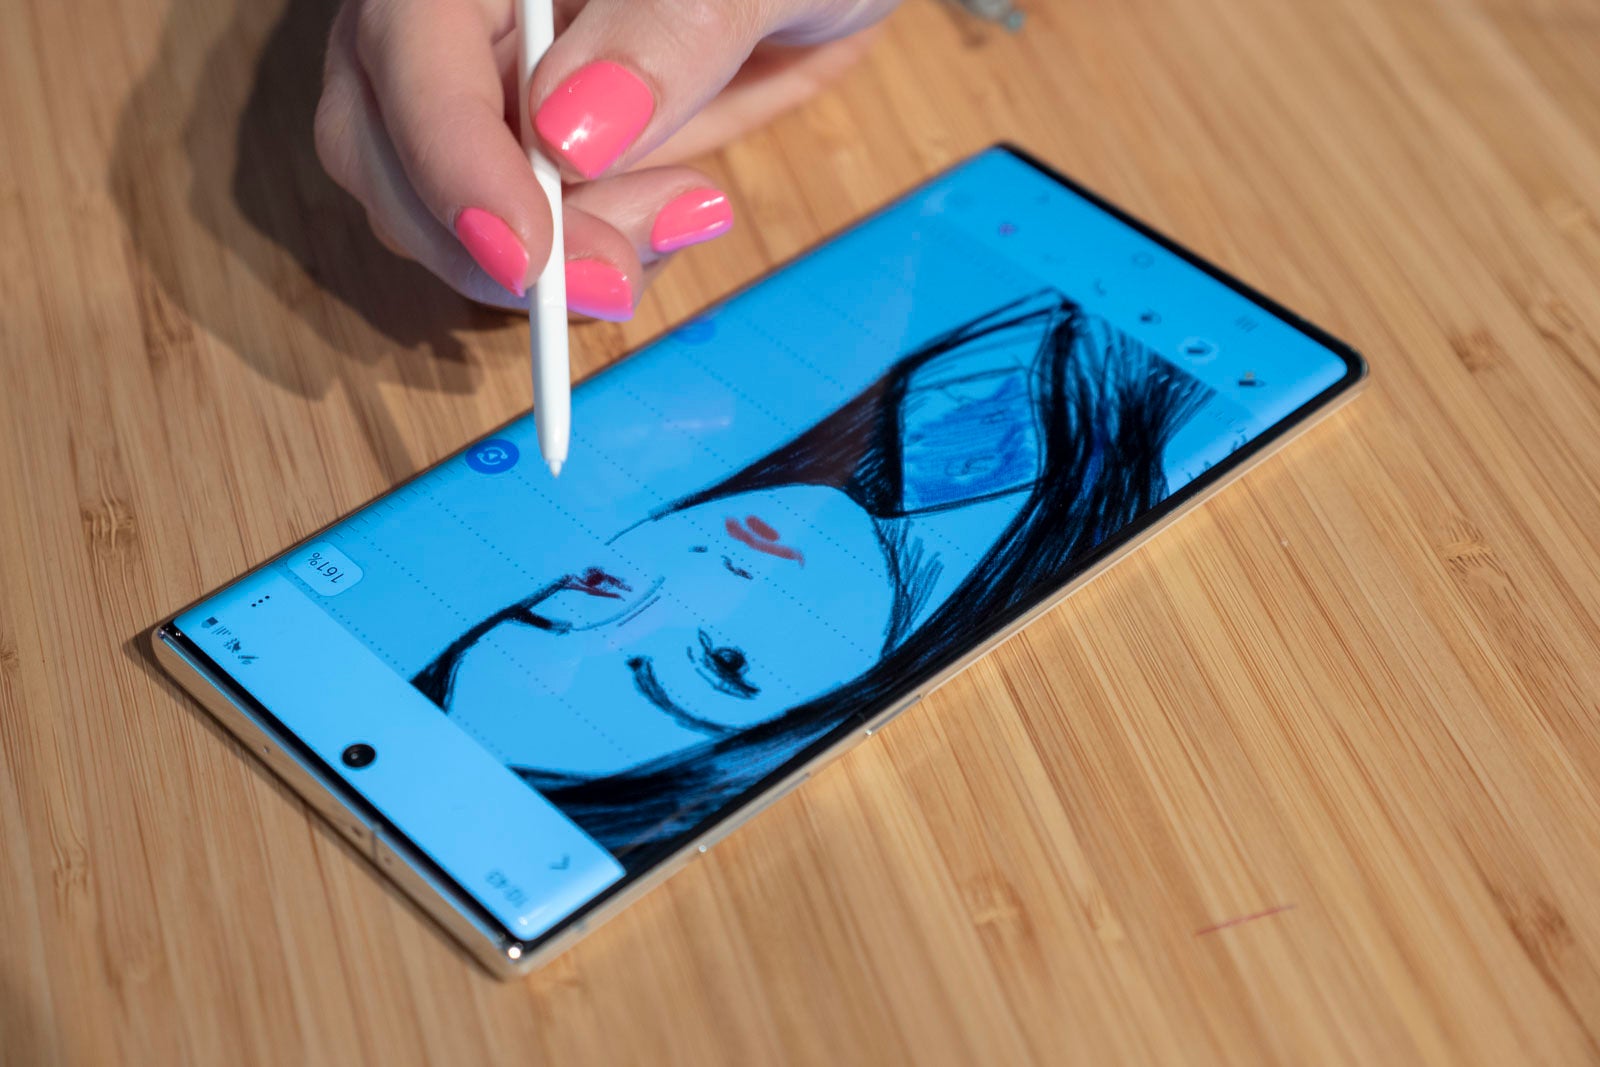 Samsung Galaxy Note 10 vs Galaxy S10+: main differences and new features